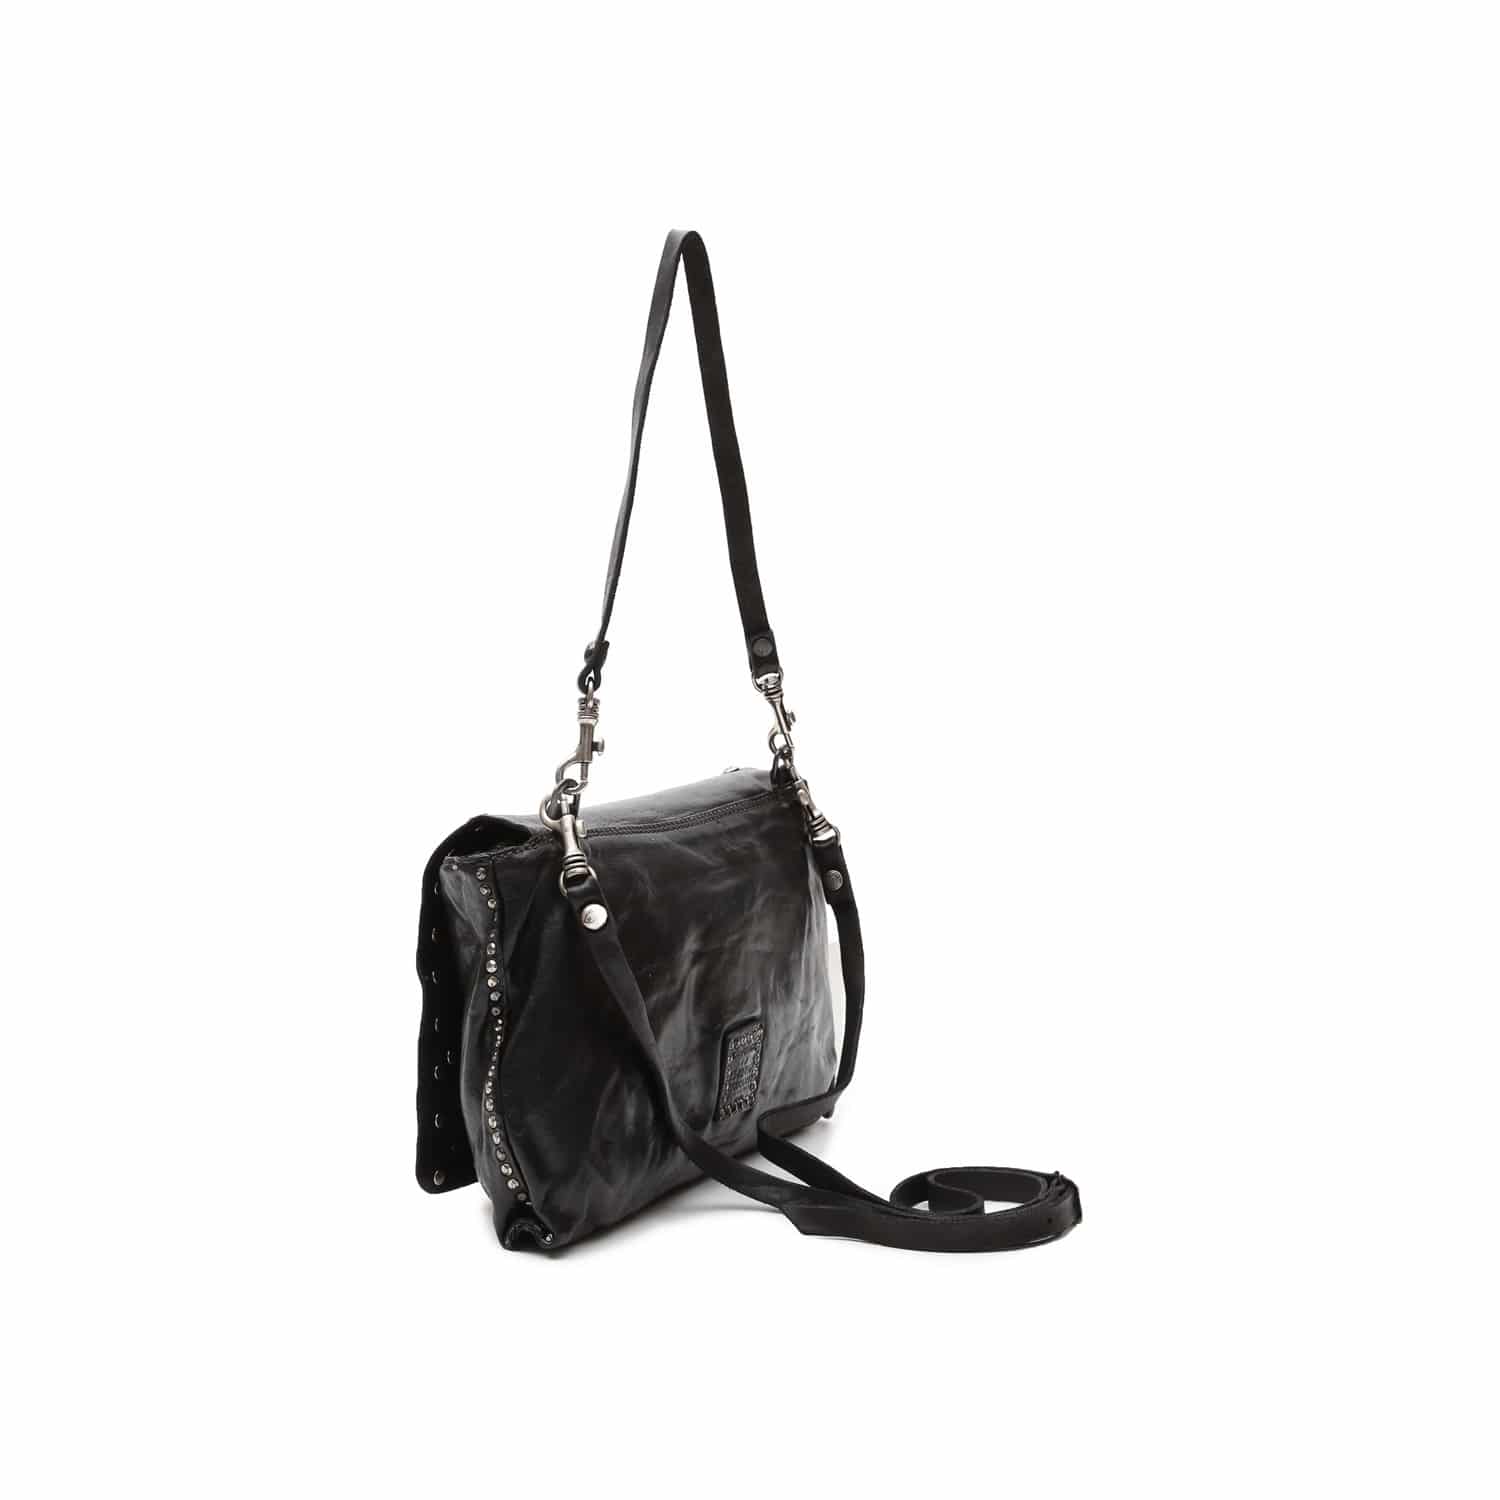 forklædt bus anekdote Baldric-bag-with-studs-and-rhinestones-in-black-leather_Cross-body-bags_campomaggi_C000260ND.X0038.C0001_03  - Pelletteria Allegrini